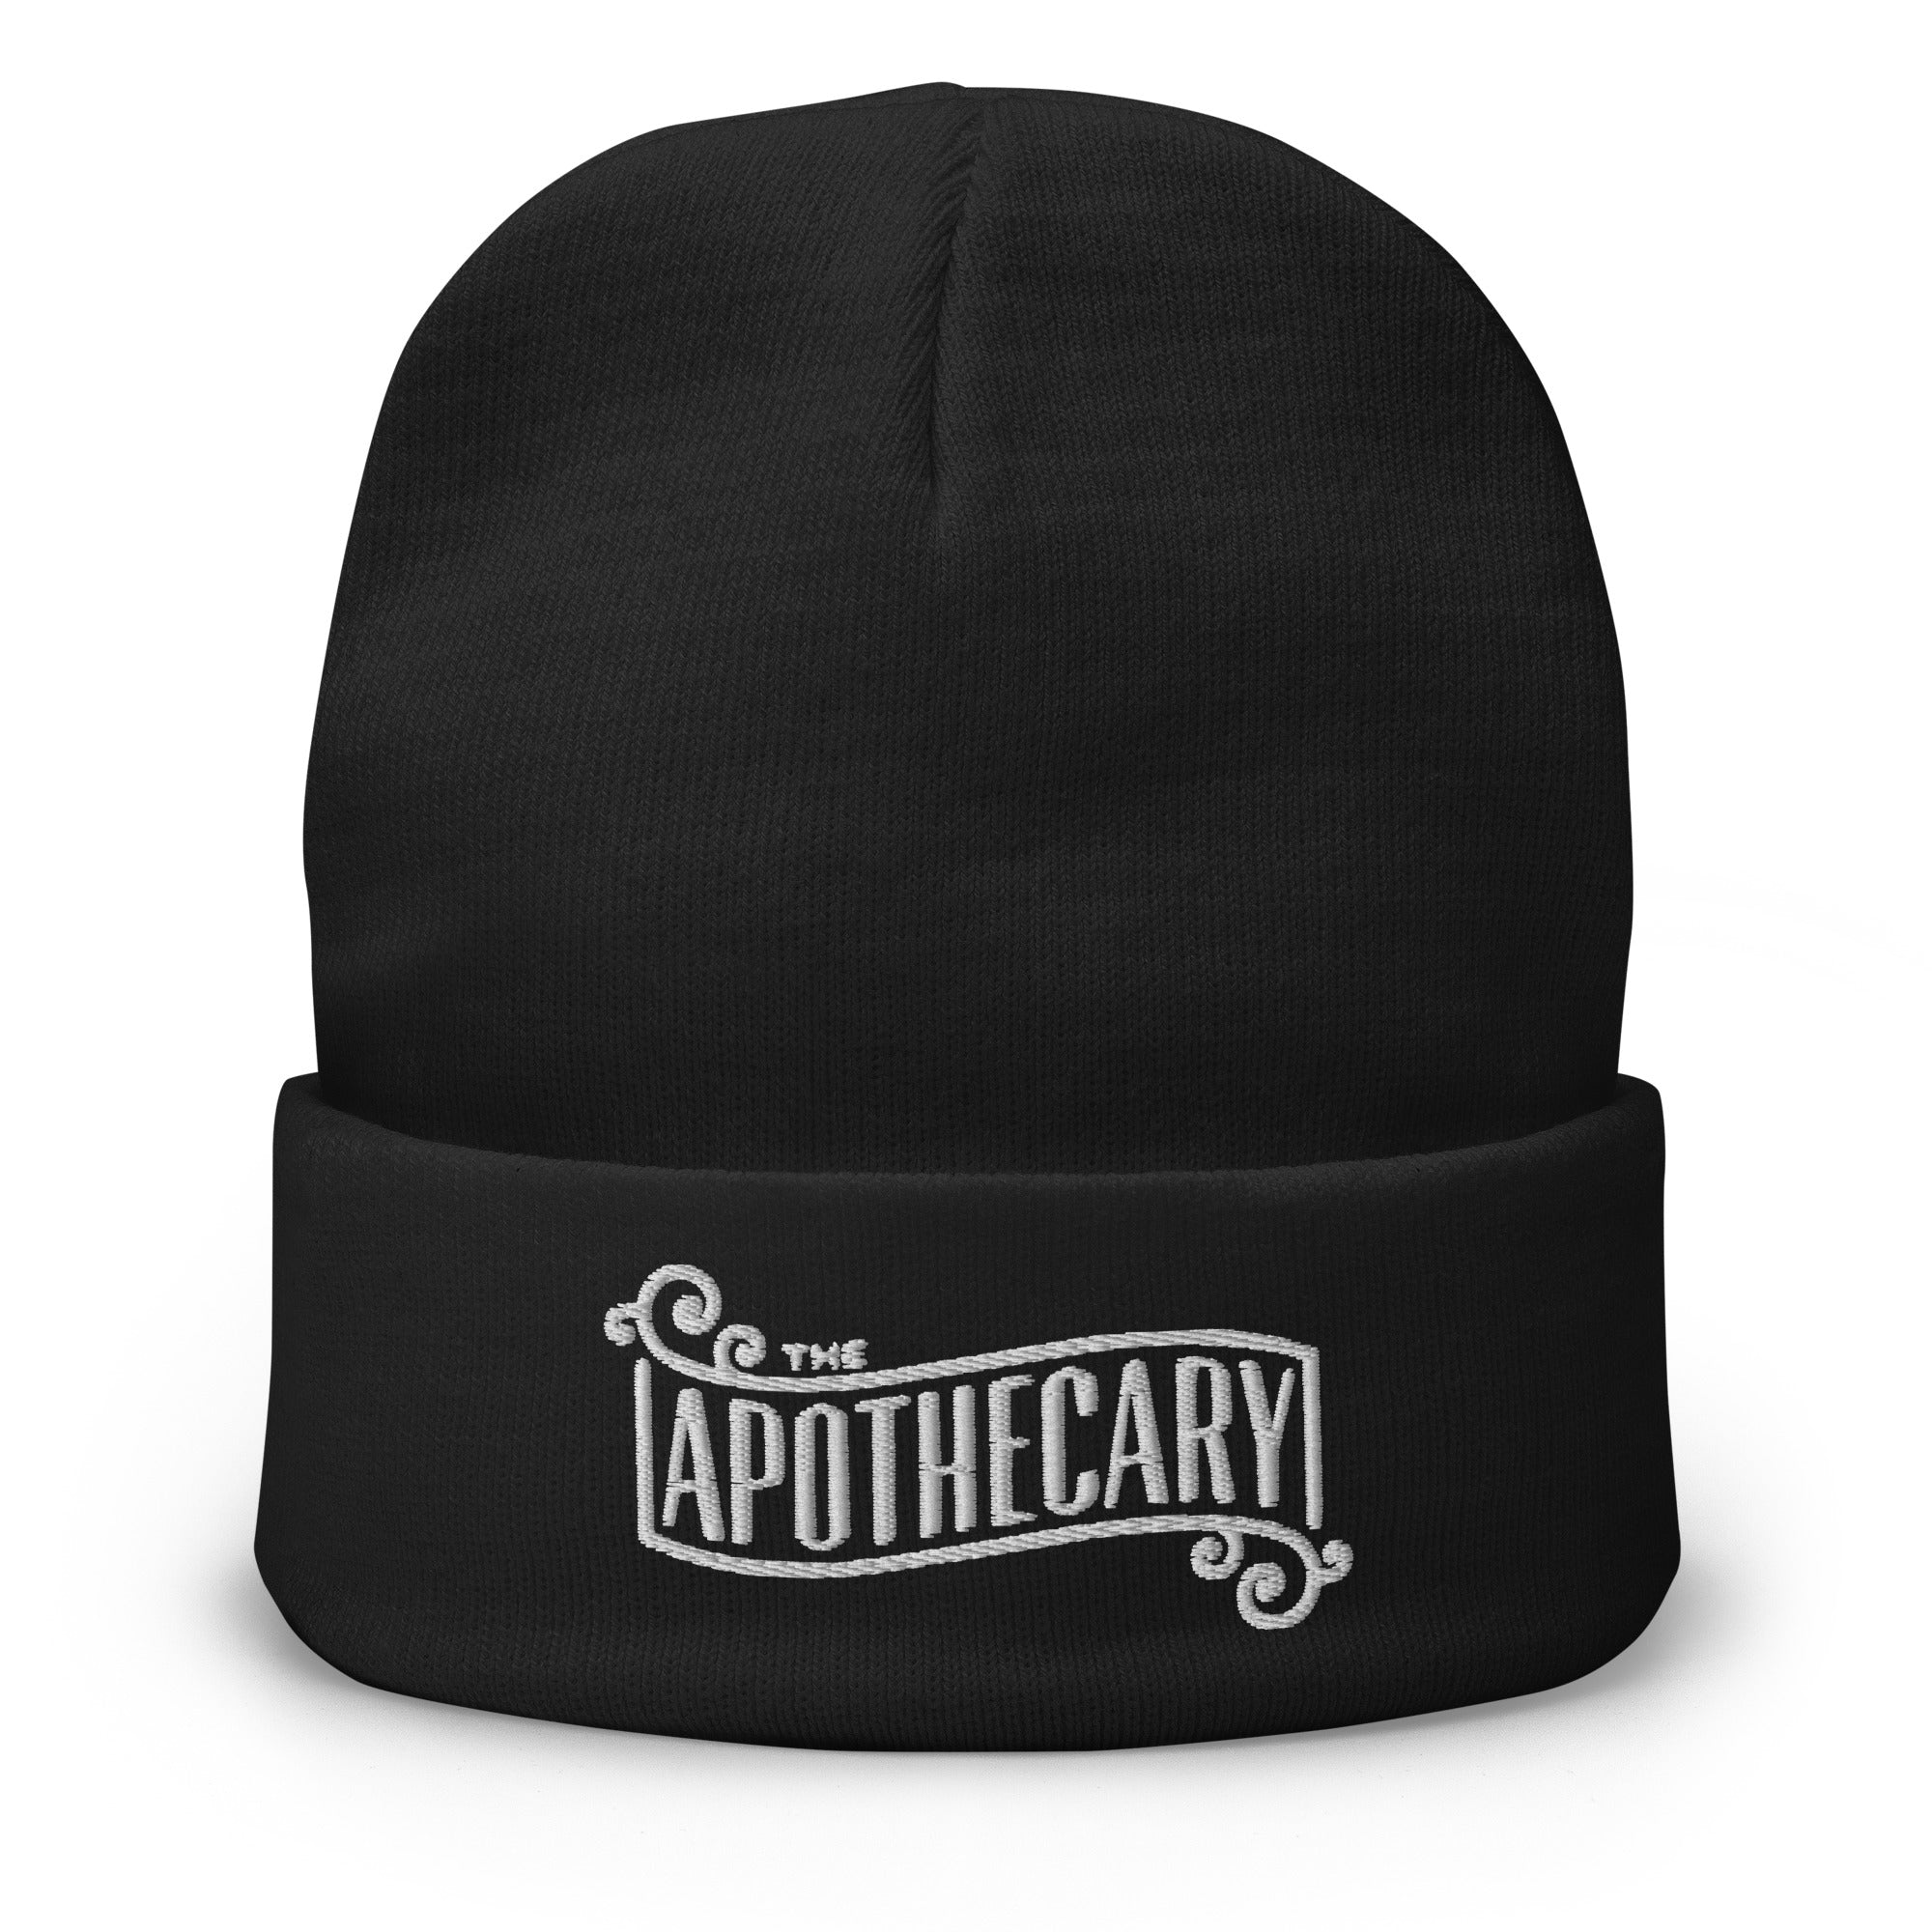 The Apothecary Embroidered Cuff Beanie Steampunk Cosplay - Edge of Life Designs